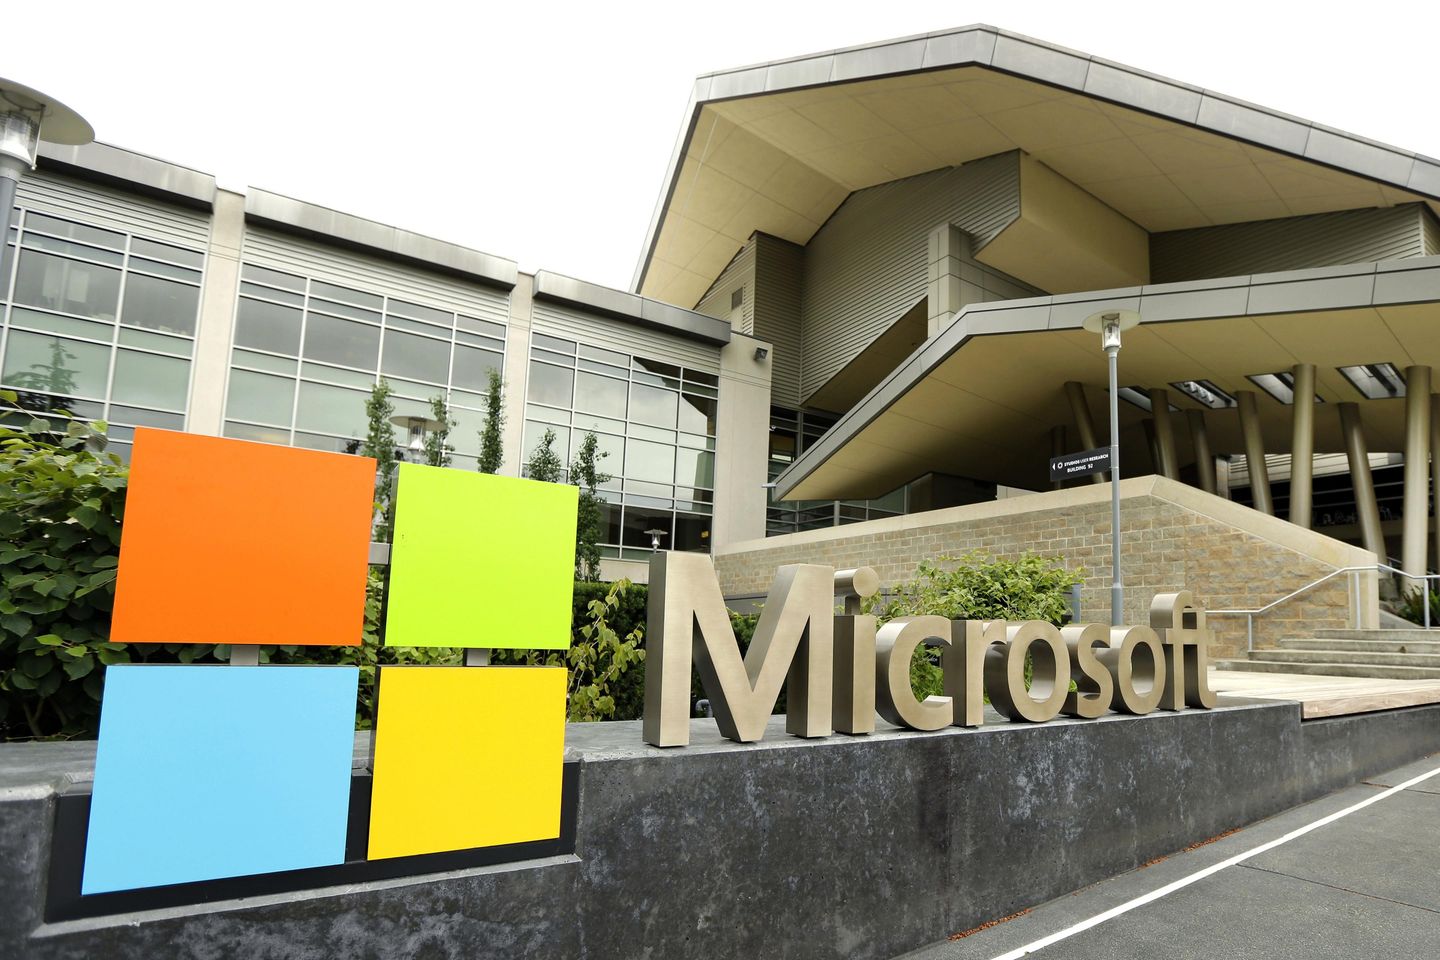 Sen. Ron Wyden wants feds to investigate Microsoft for cyber failings enabling Chinese hack